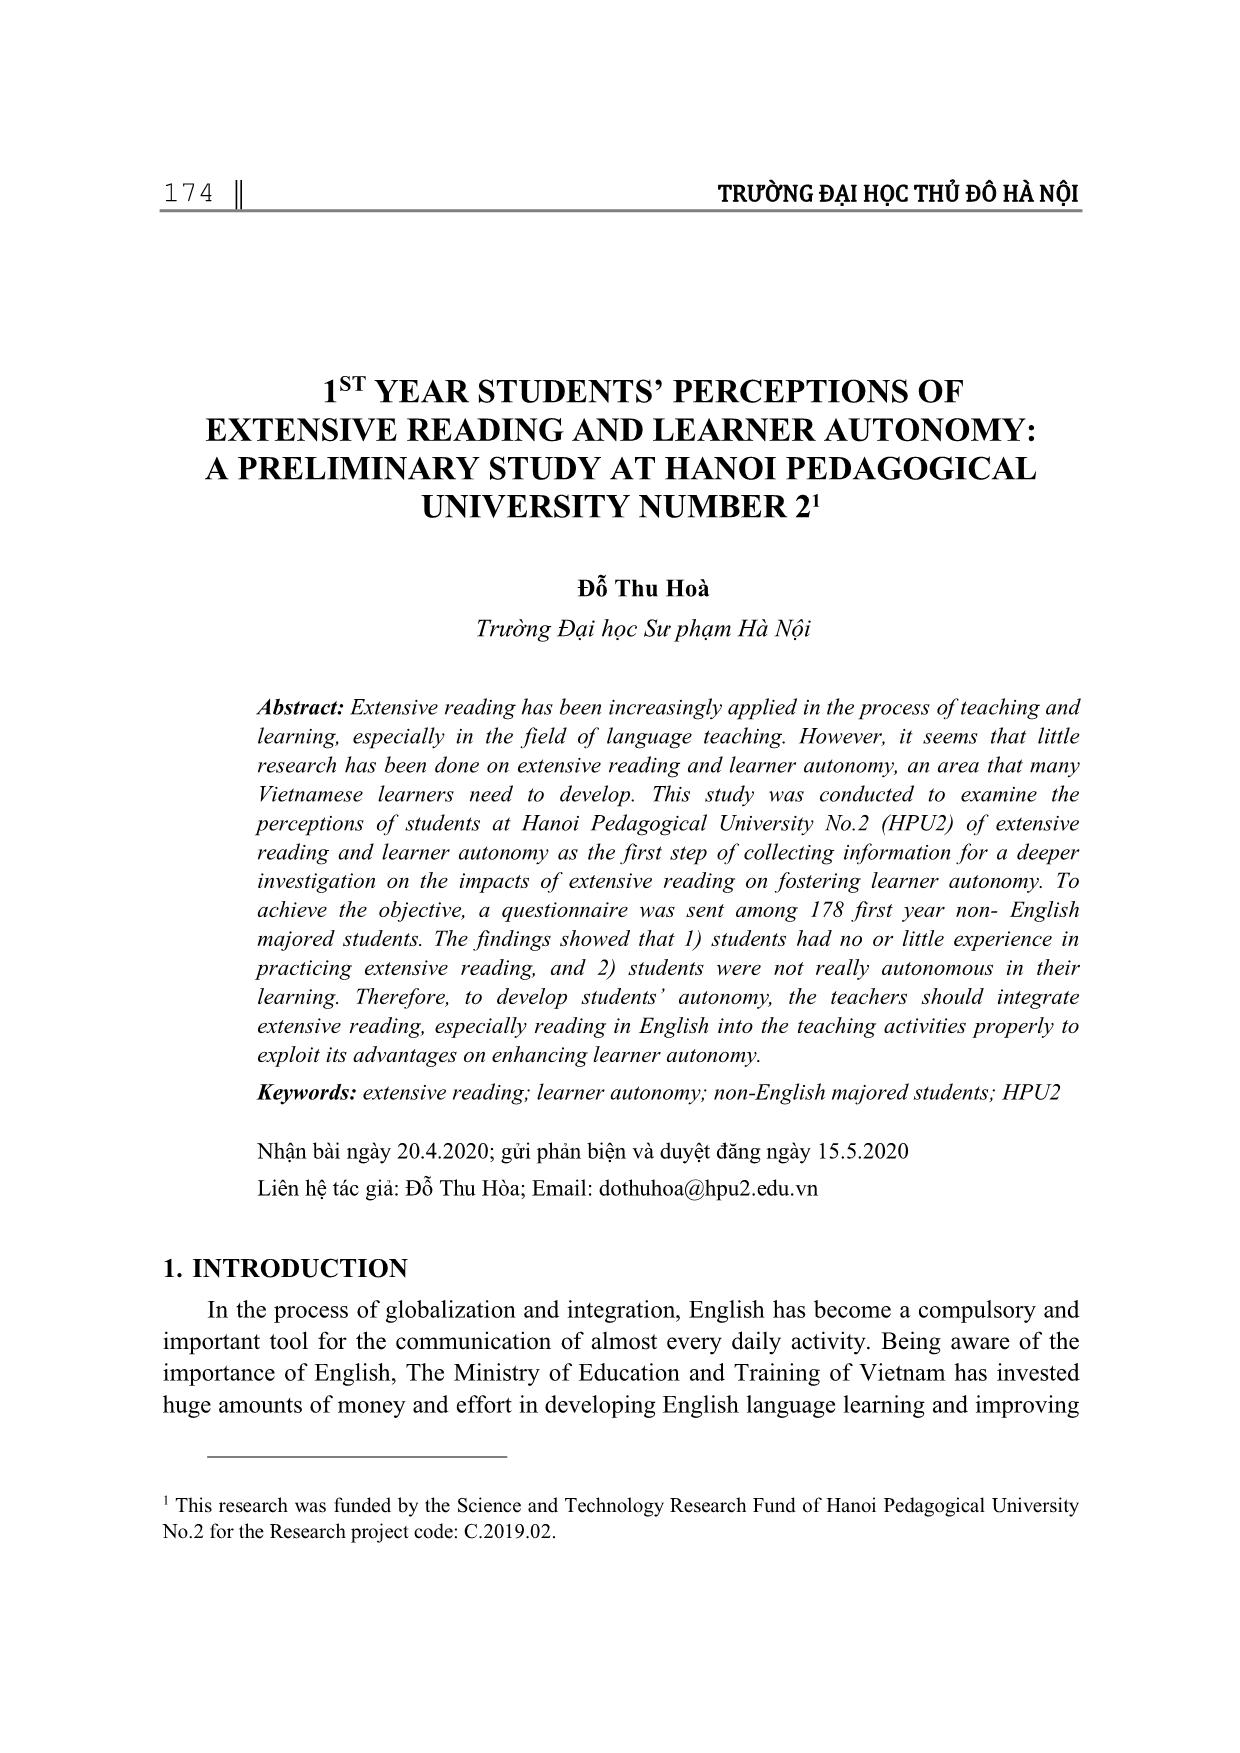 1st year students’ perceptions of extensive reading and learner autonomy: A preliminary study at Hanoi pedagogical university number 21 trang 1